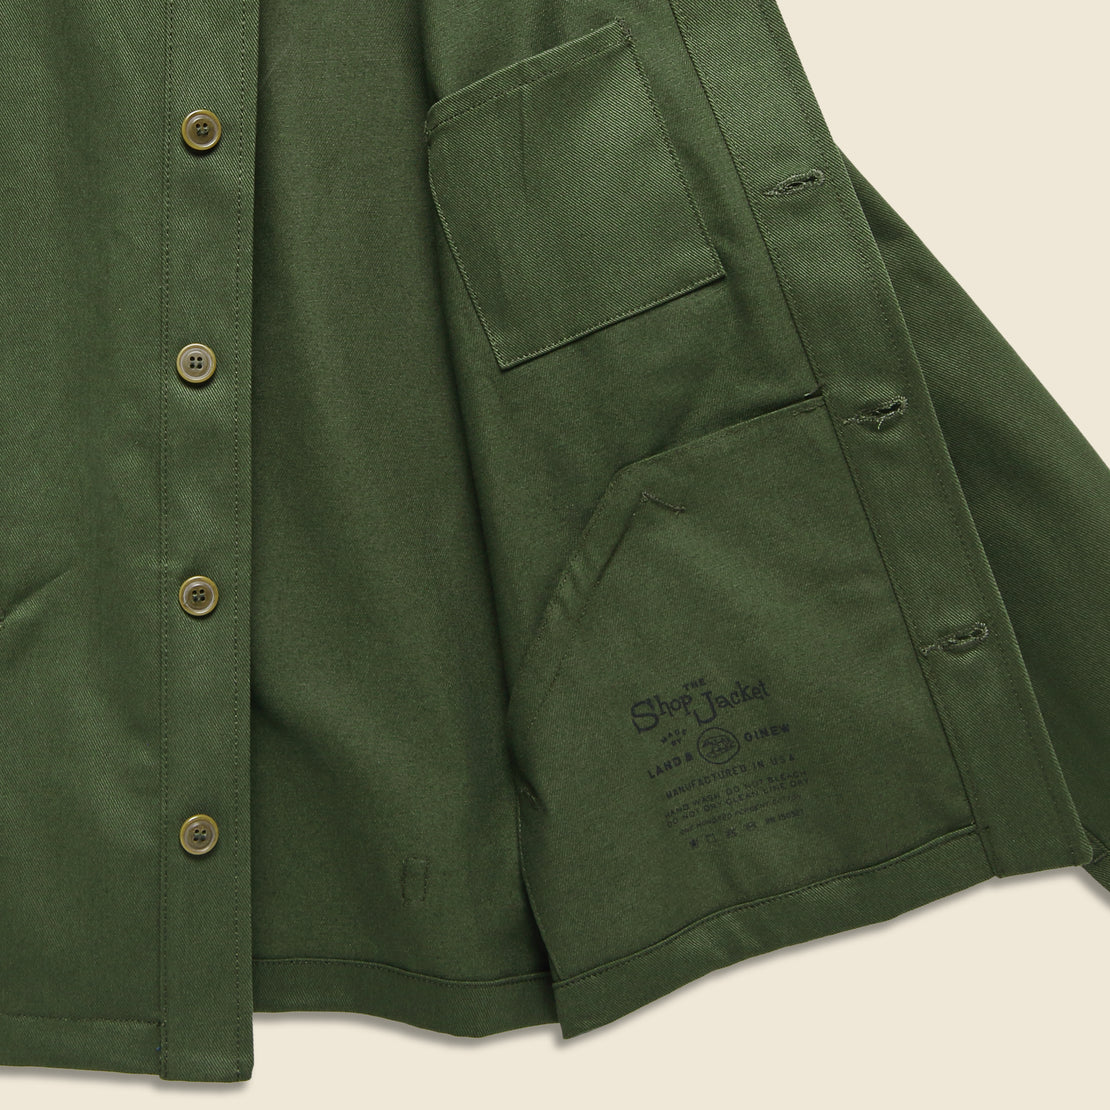 Shop Jacket - Dark Olive - House of LAND - STAG Provisions - Outerwear - Coat / Jacket